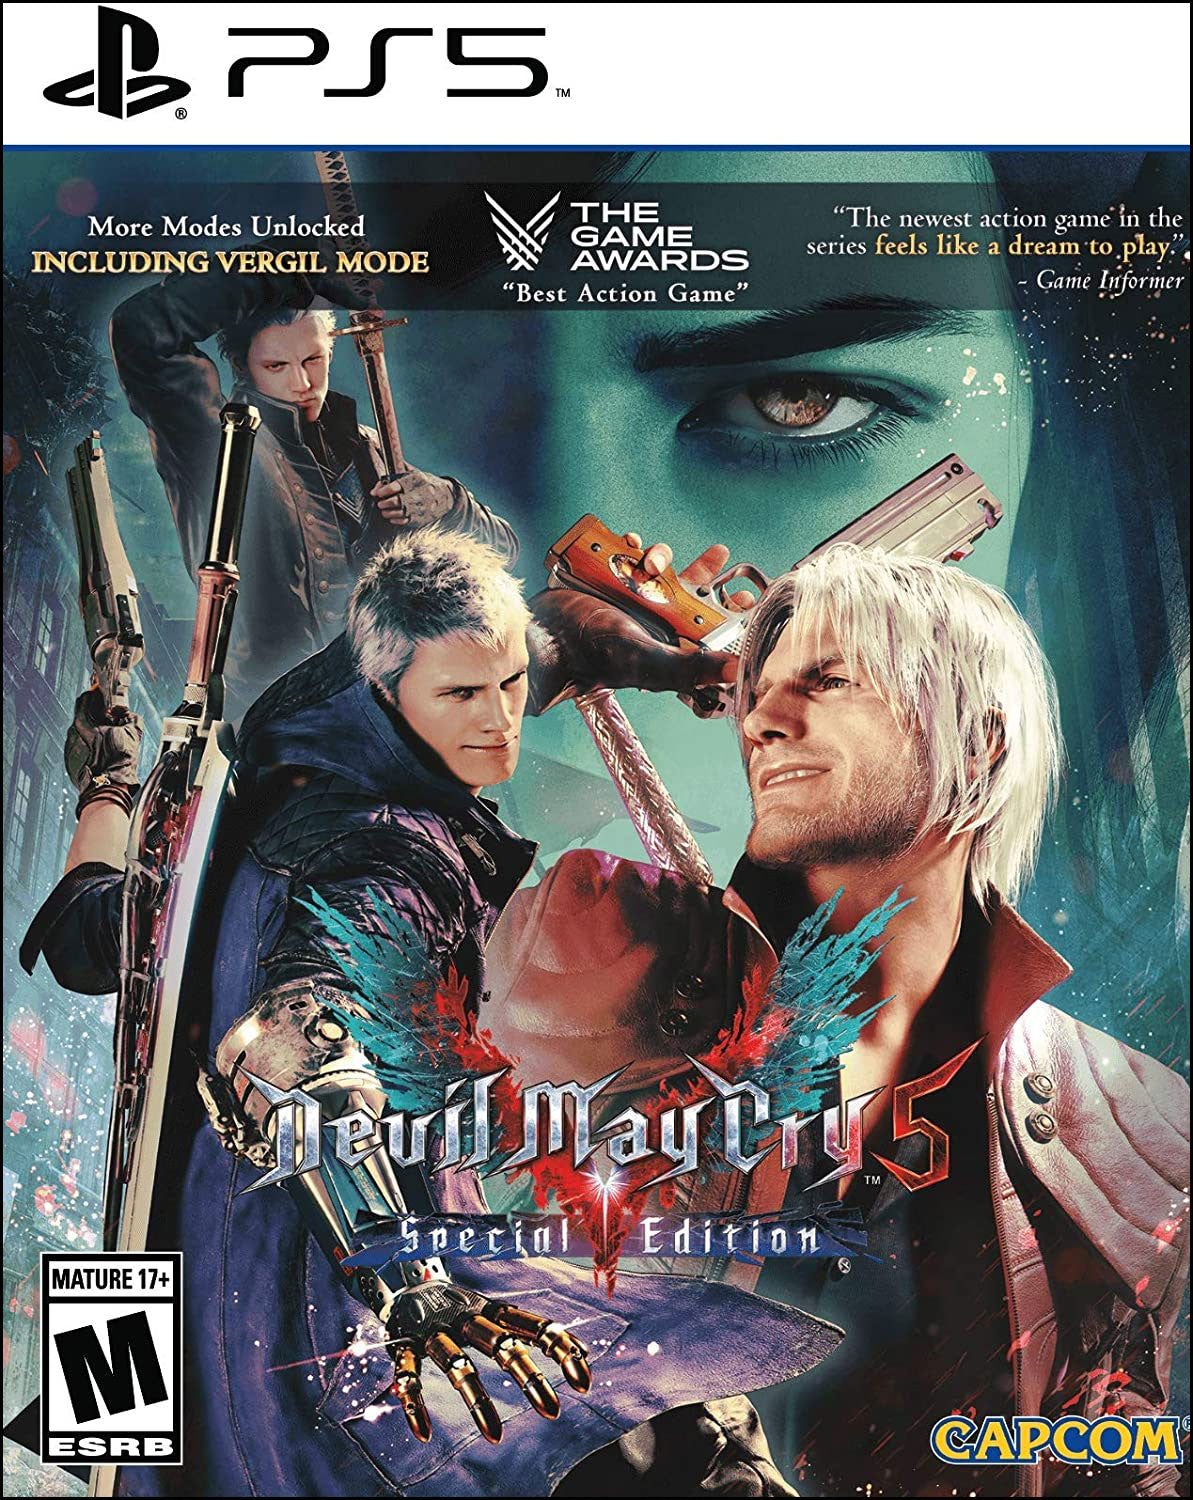 DEVIL MAY CRY 5 WEEKEND SALE! SALE ENDS MAY 15, 2022!